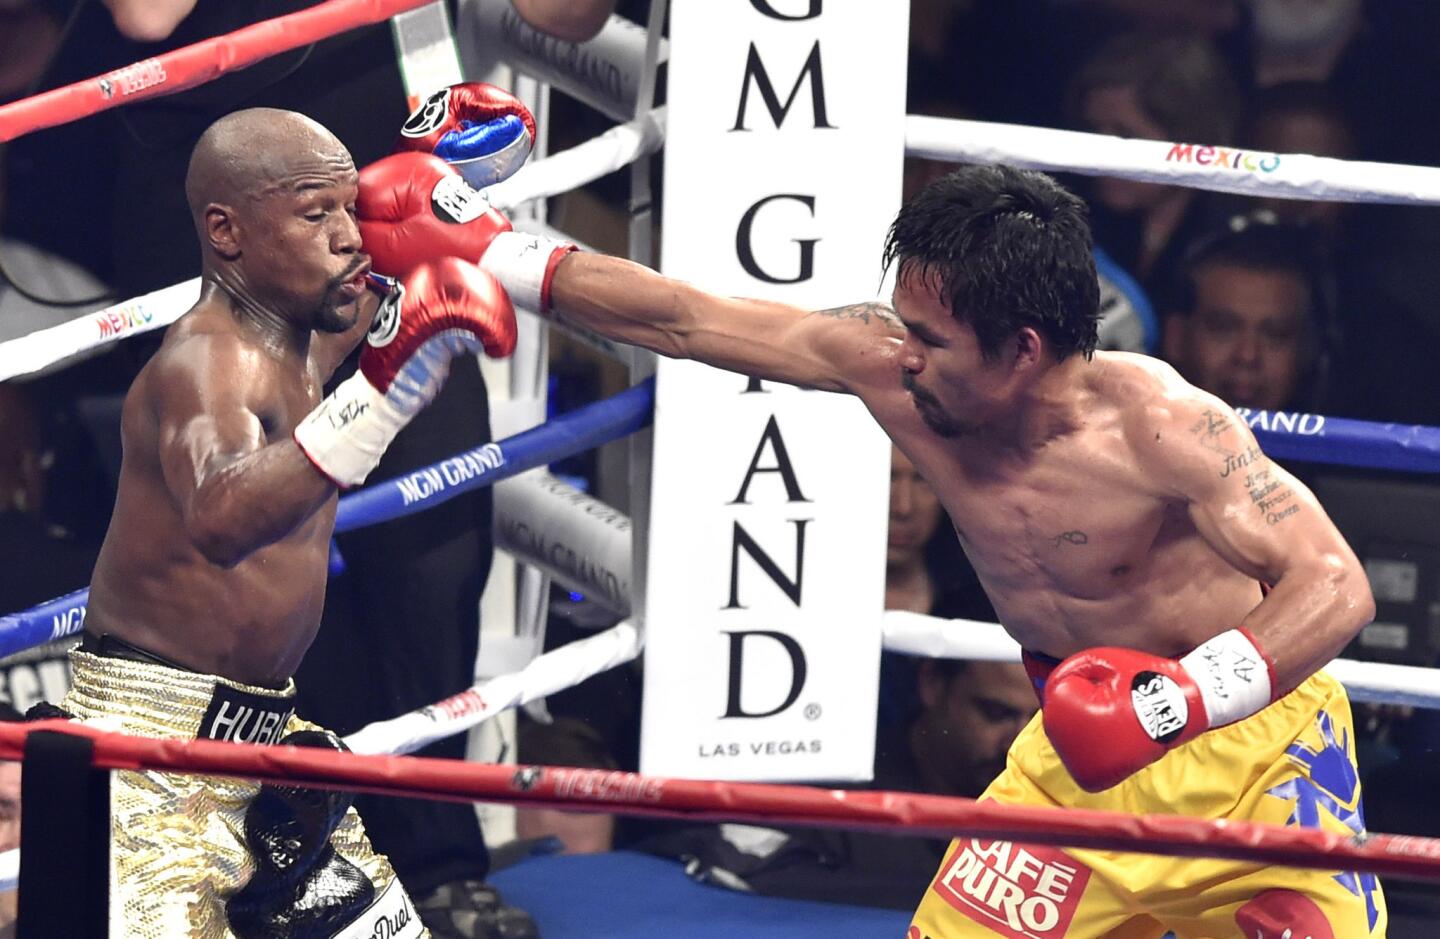 Manny Pacquiao lands a punch during the sixth round against Floyd Mayweather Jr.